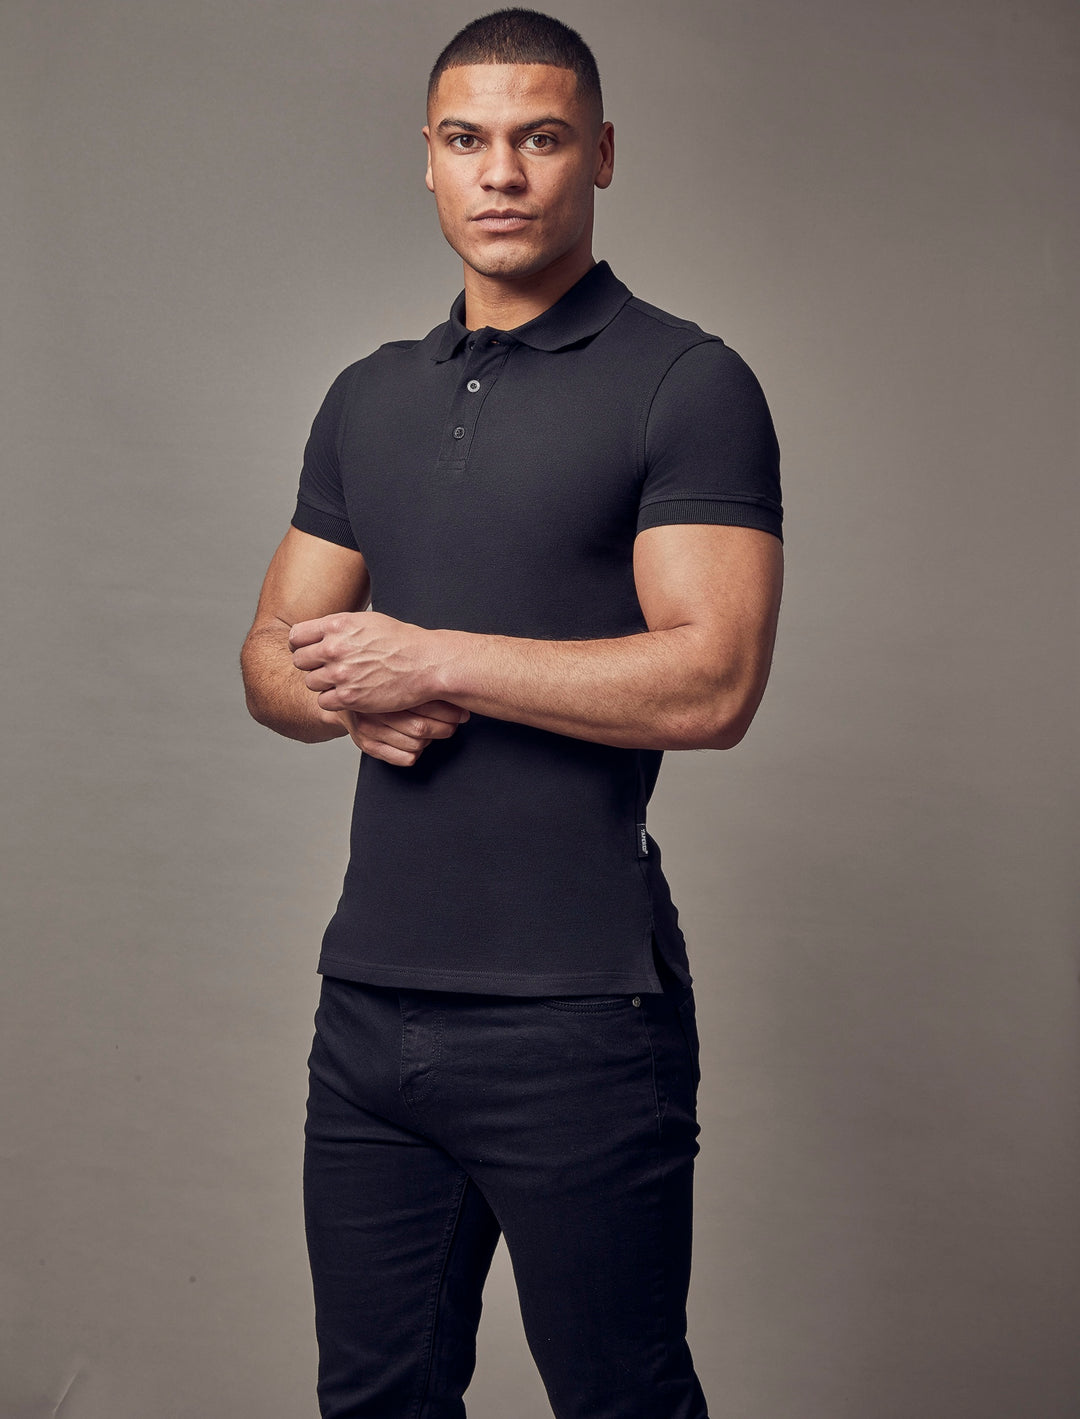 Black short-sleeve polo shirt in a muscle fit by Tapered Menswear, featuring a tapered style and highlighting premium quality.